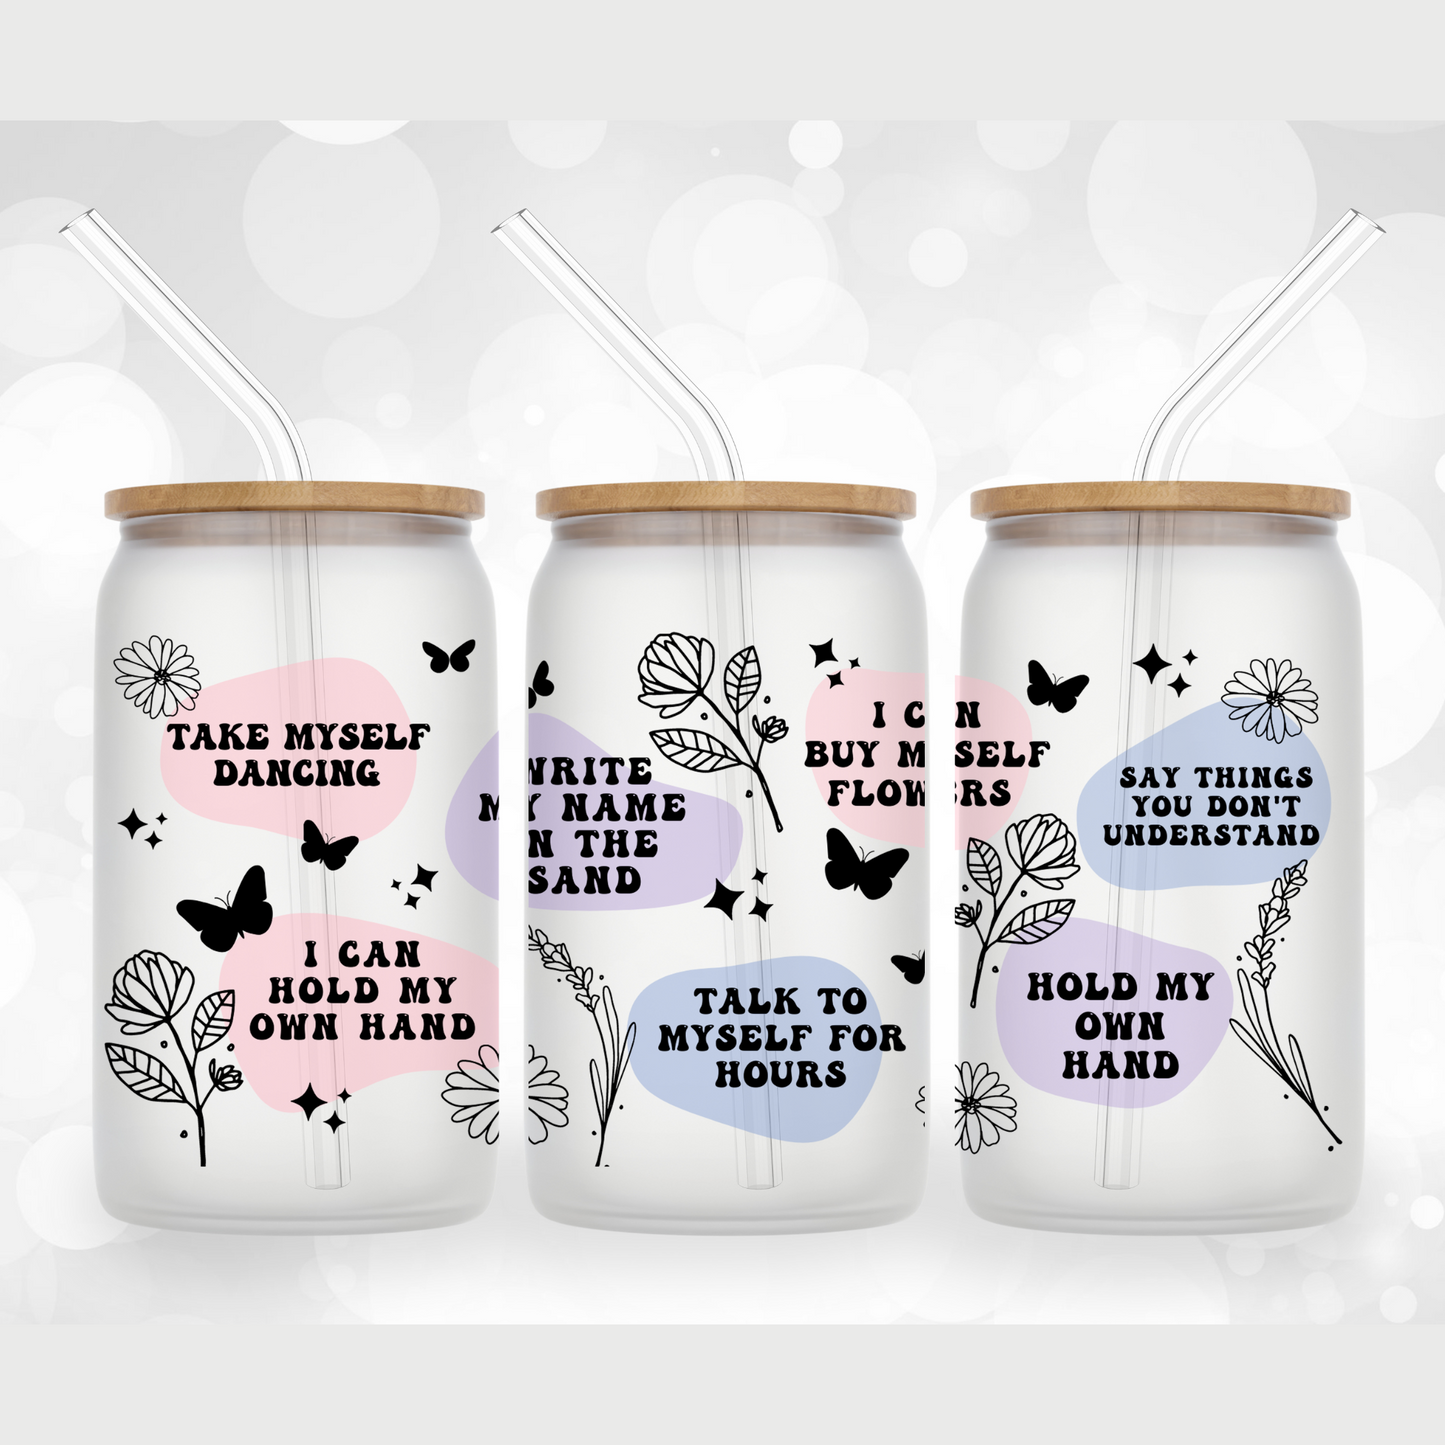 Blueberry Lemonade - UVDTF Beer Can Glass Wrap (Ready-to-Ship) – Happy Wrap  Co.